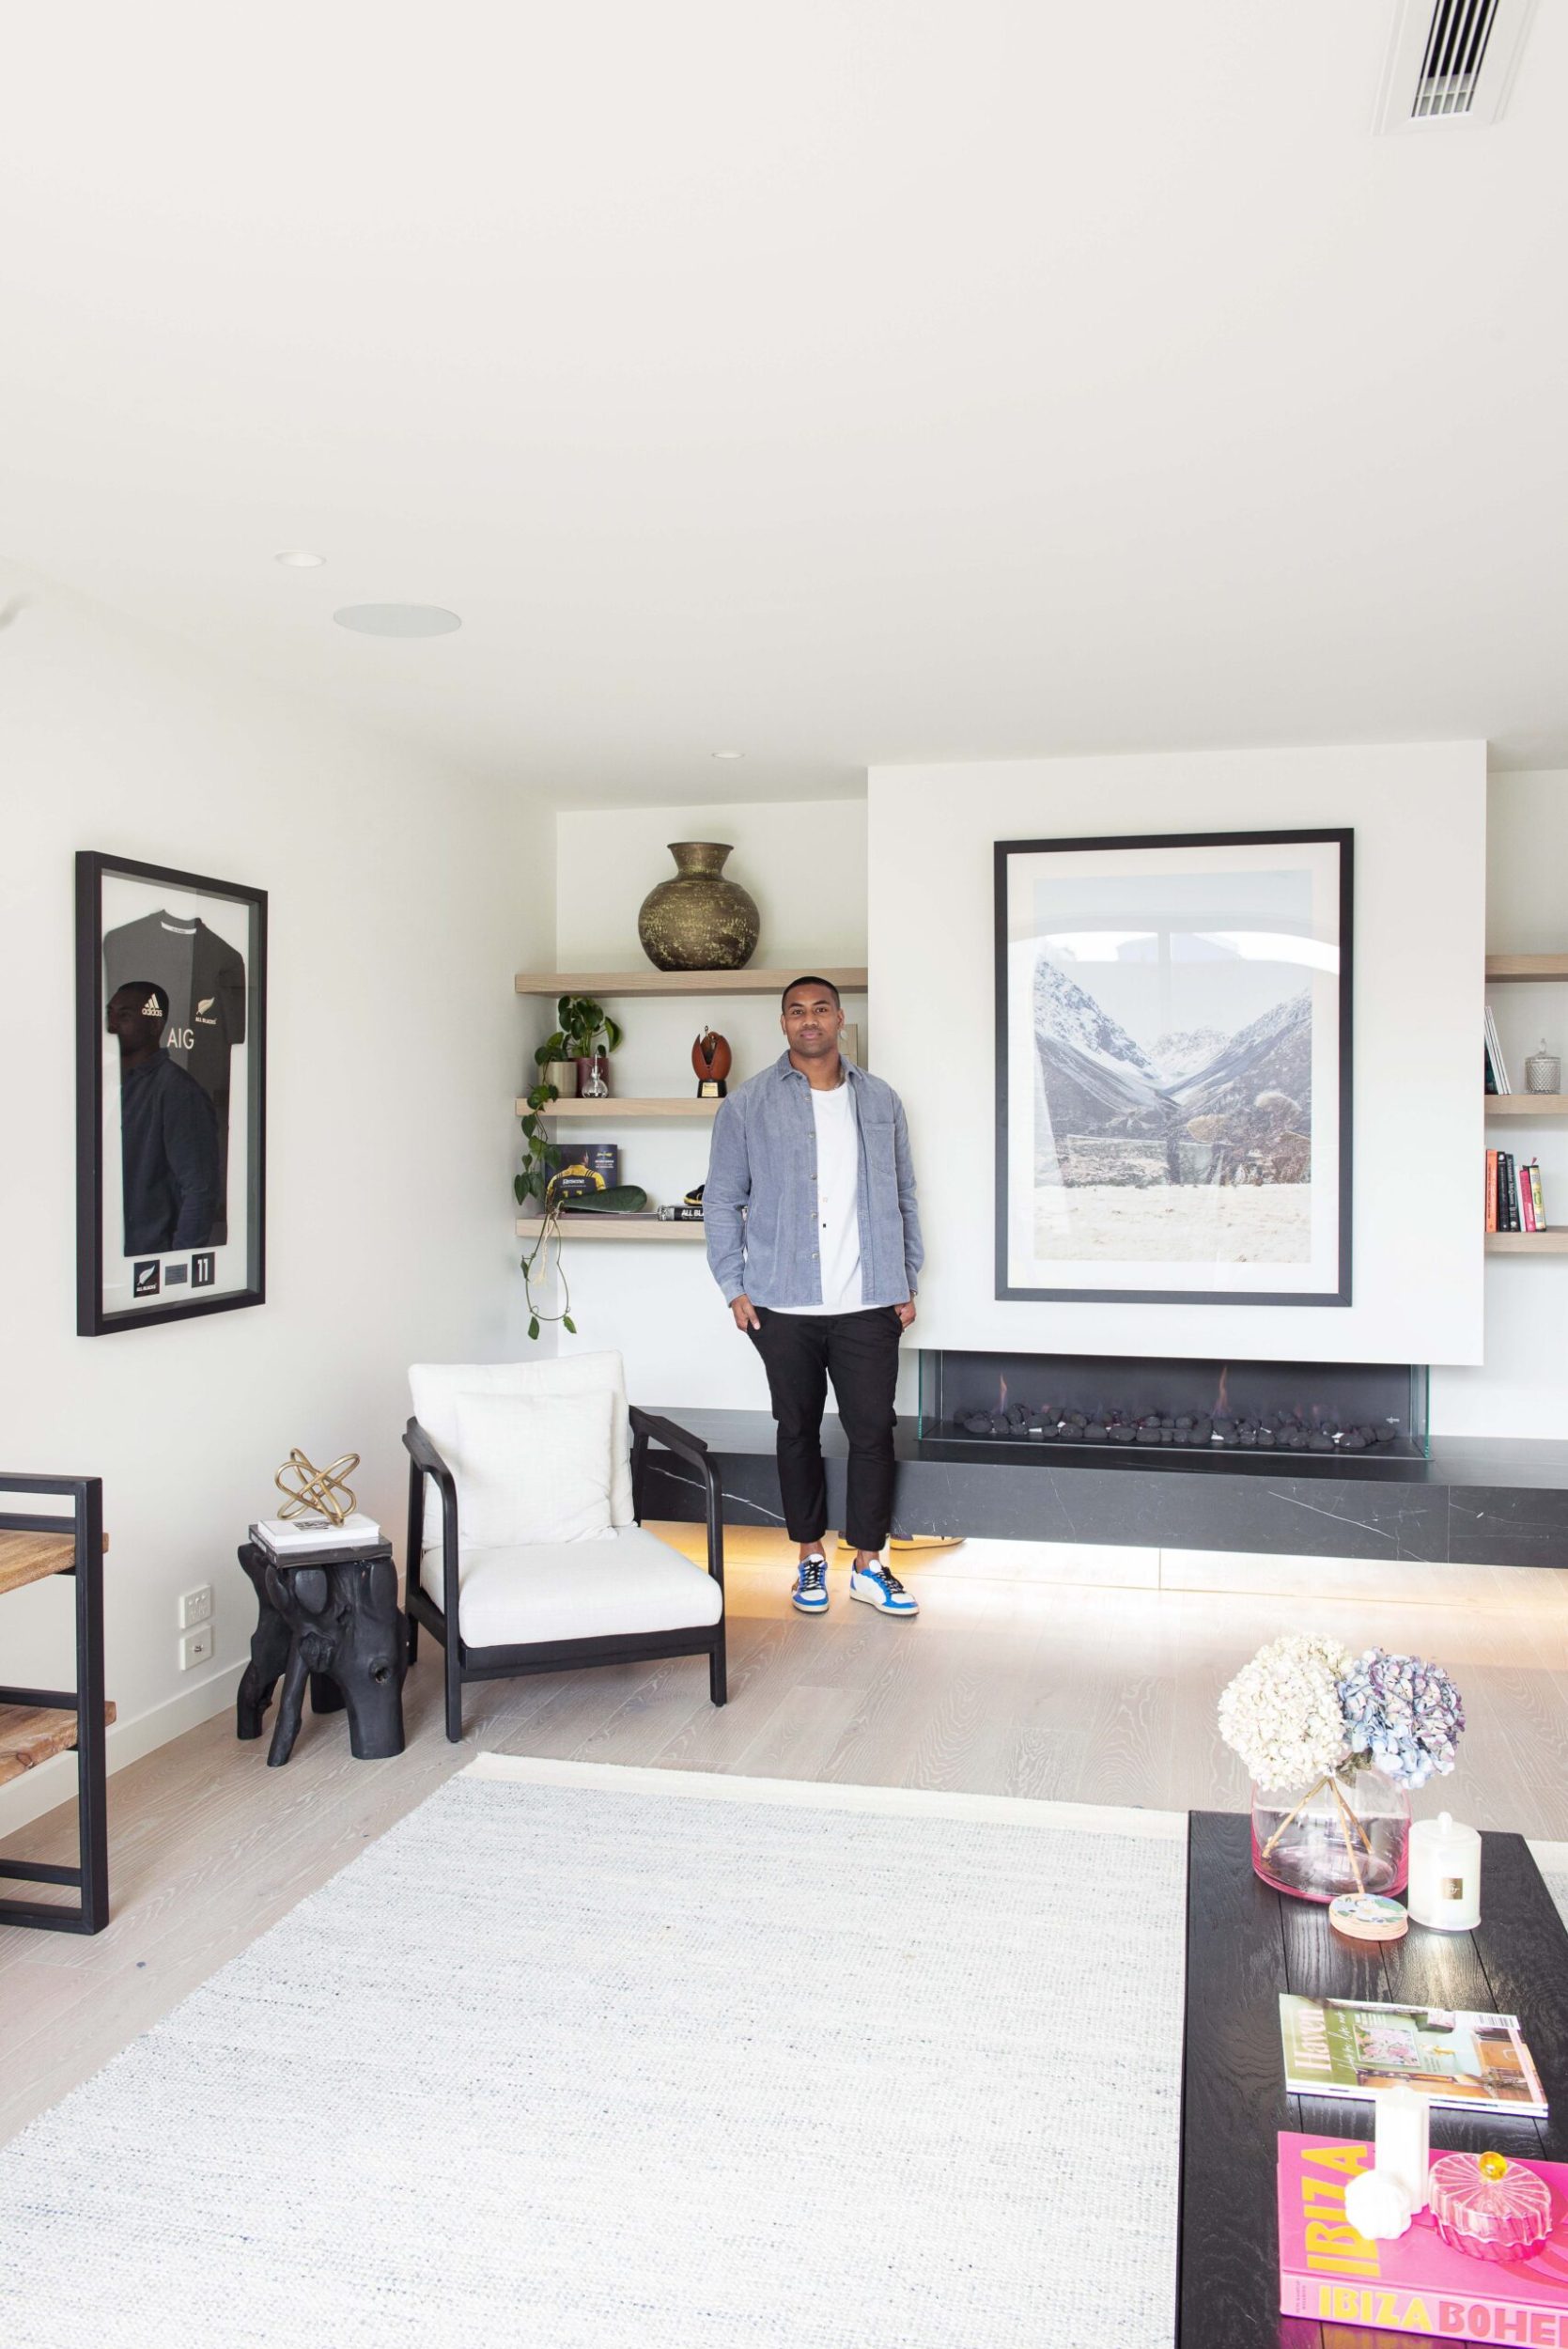 Julian Savea standing in his living room next to a All Blacks jersey in a glass frame